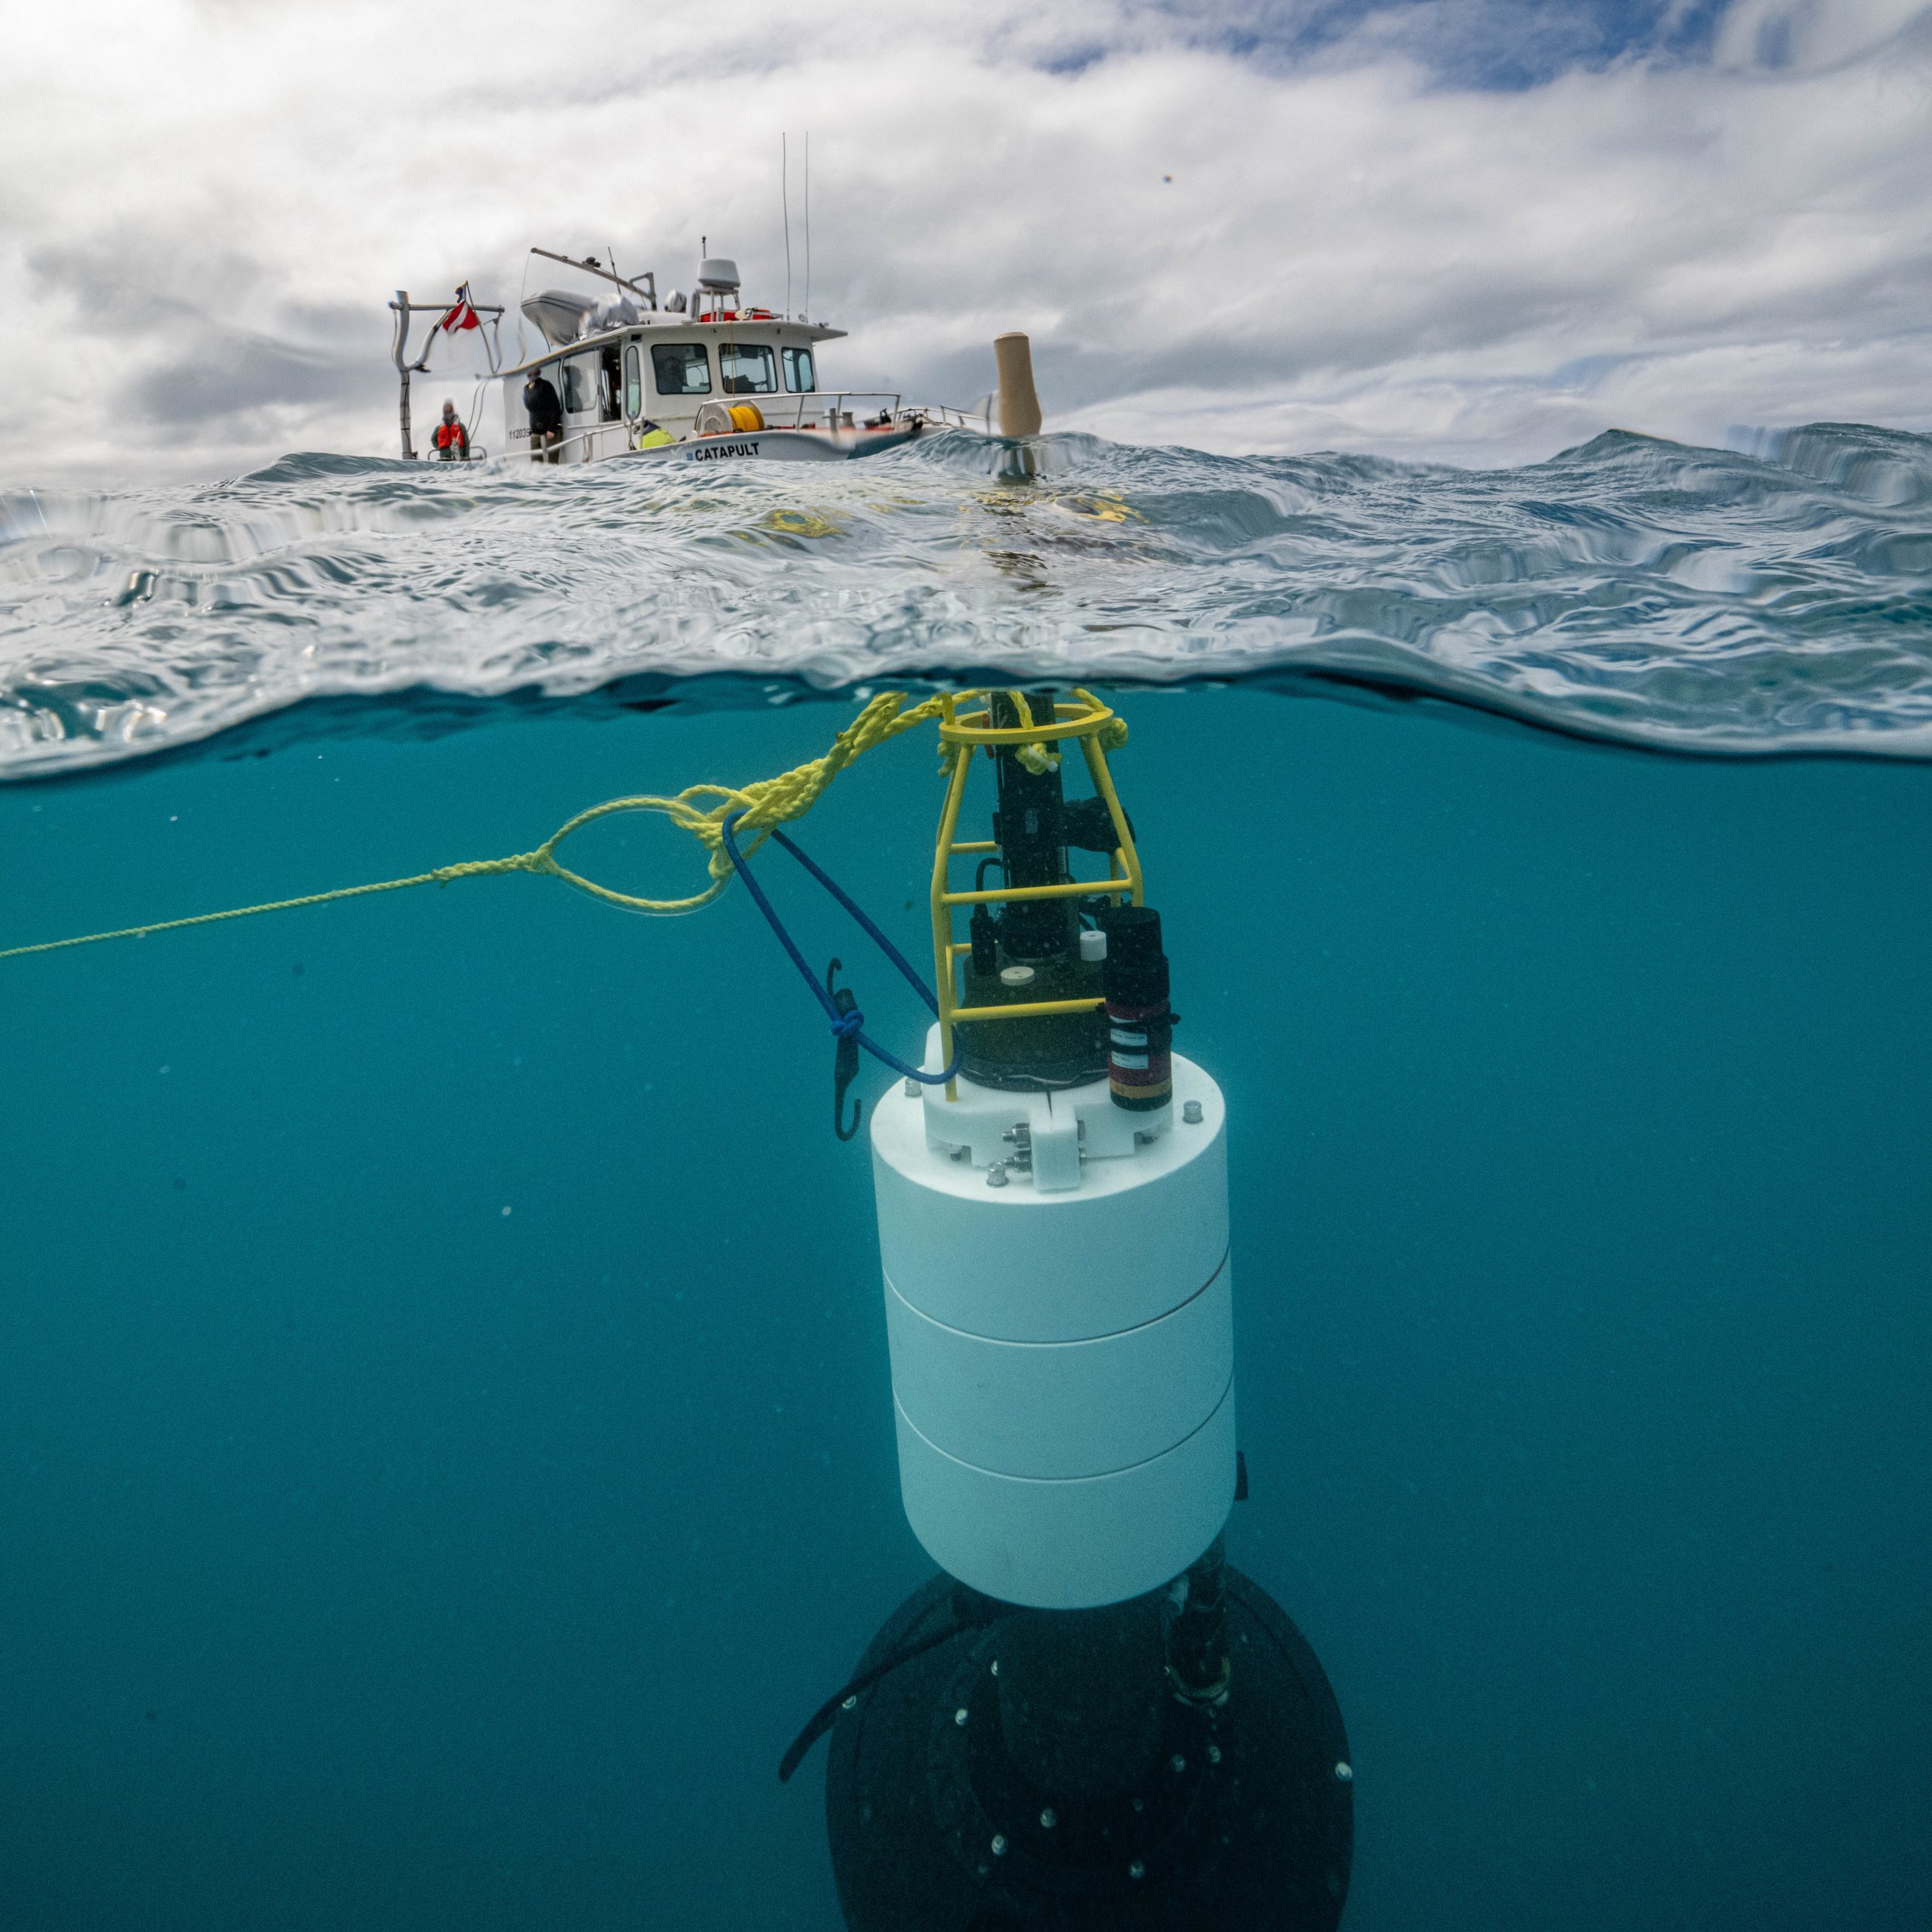 TZEX, the Twilight Zone Explorer, is deployed in the ocean to gather data about marine snow, biological particles that float through the water column, and serve the important role of transporting carbon from surface waters to the deep sea. Photo by Evan Kovacs for the Woods Hole Oceanographic Institution.
